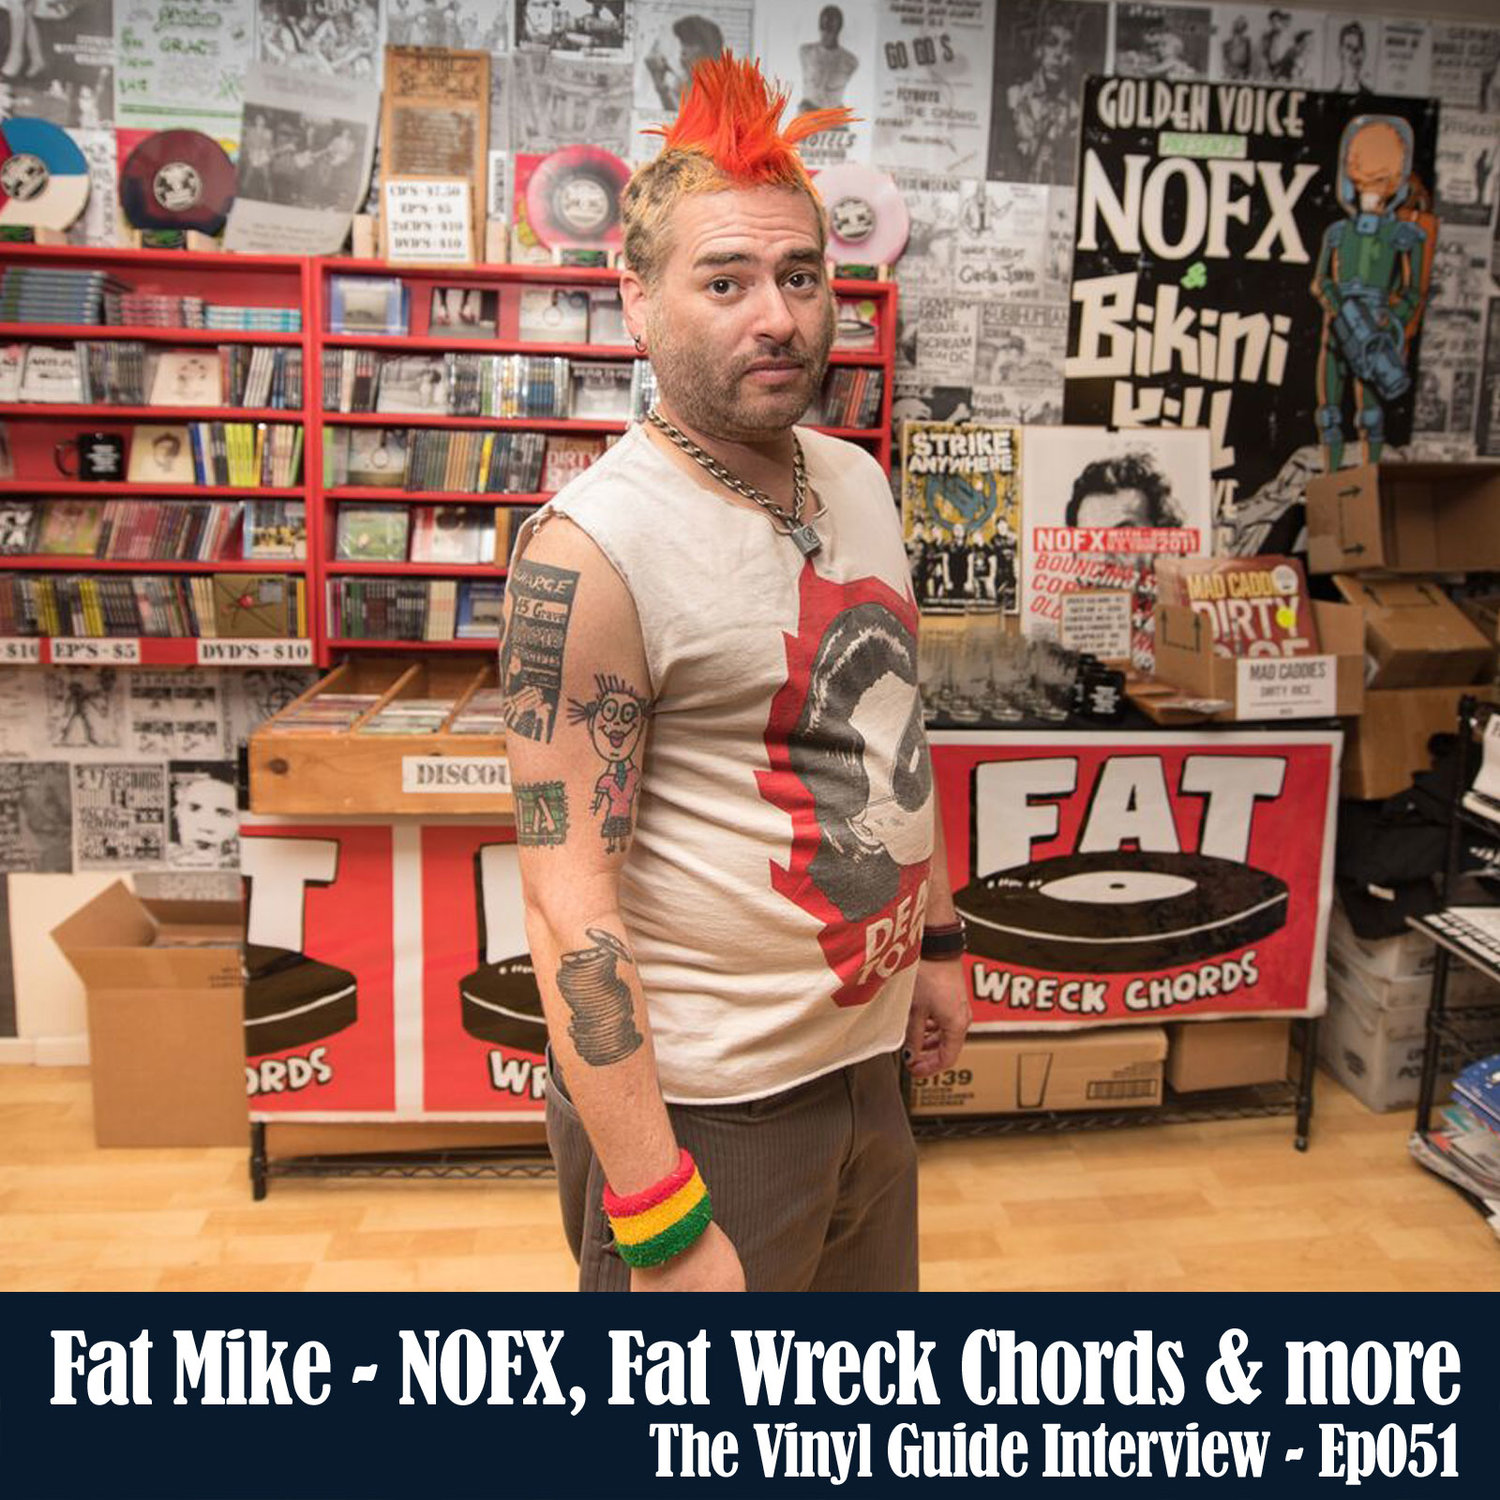 Ep051: Fat Mike of NOFX, Fat Wreck Chords  More - | The Vinyl Guide  podcast | Interviews for Record Collectors  Music Fans